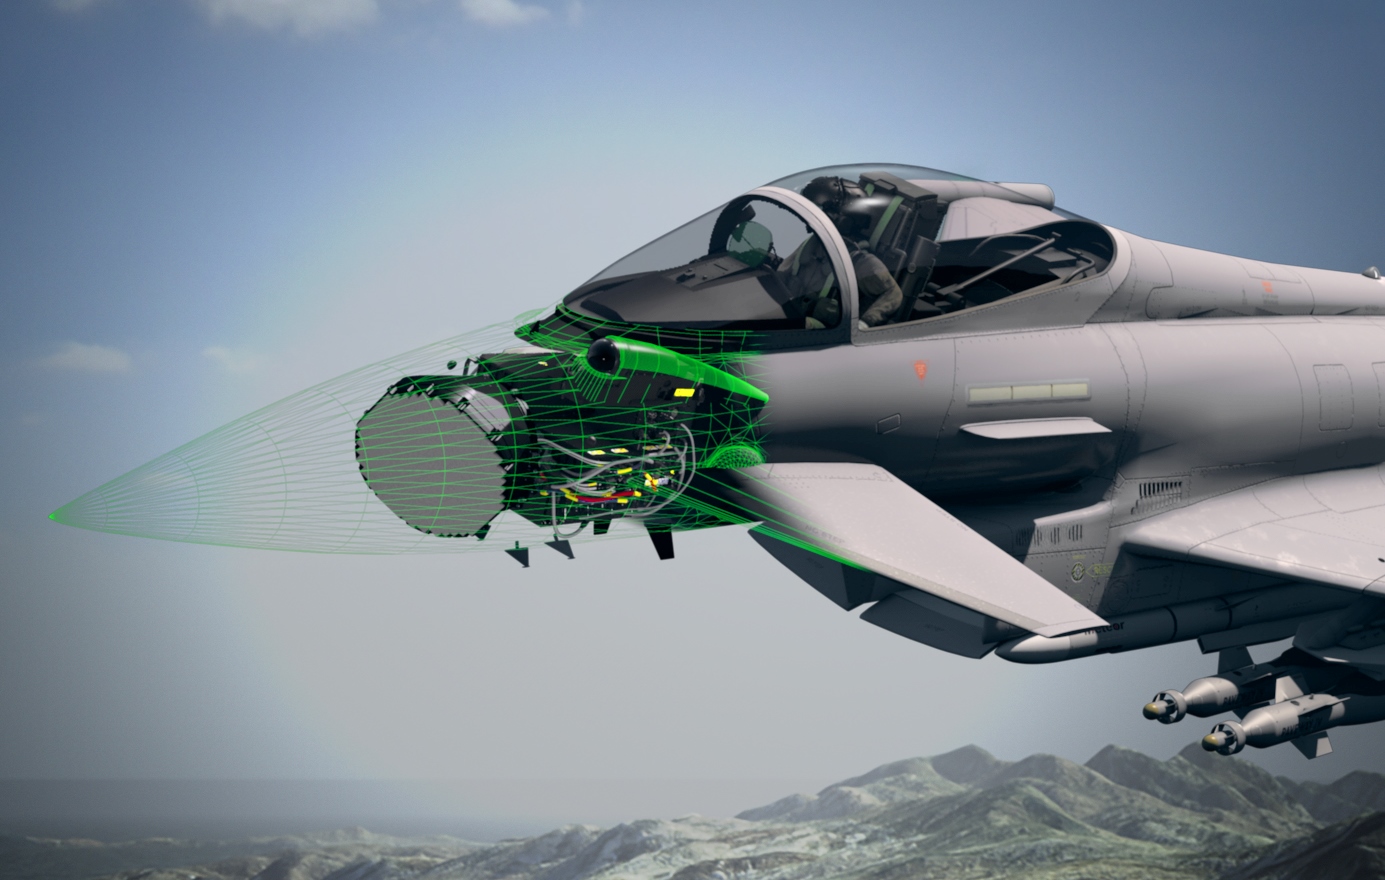 Image shows a graphic of a RAF Typhoon in flight over mountains, with the aircraft nose showing inside the structure.